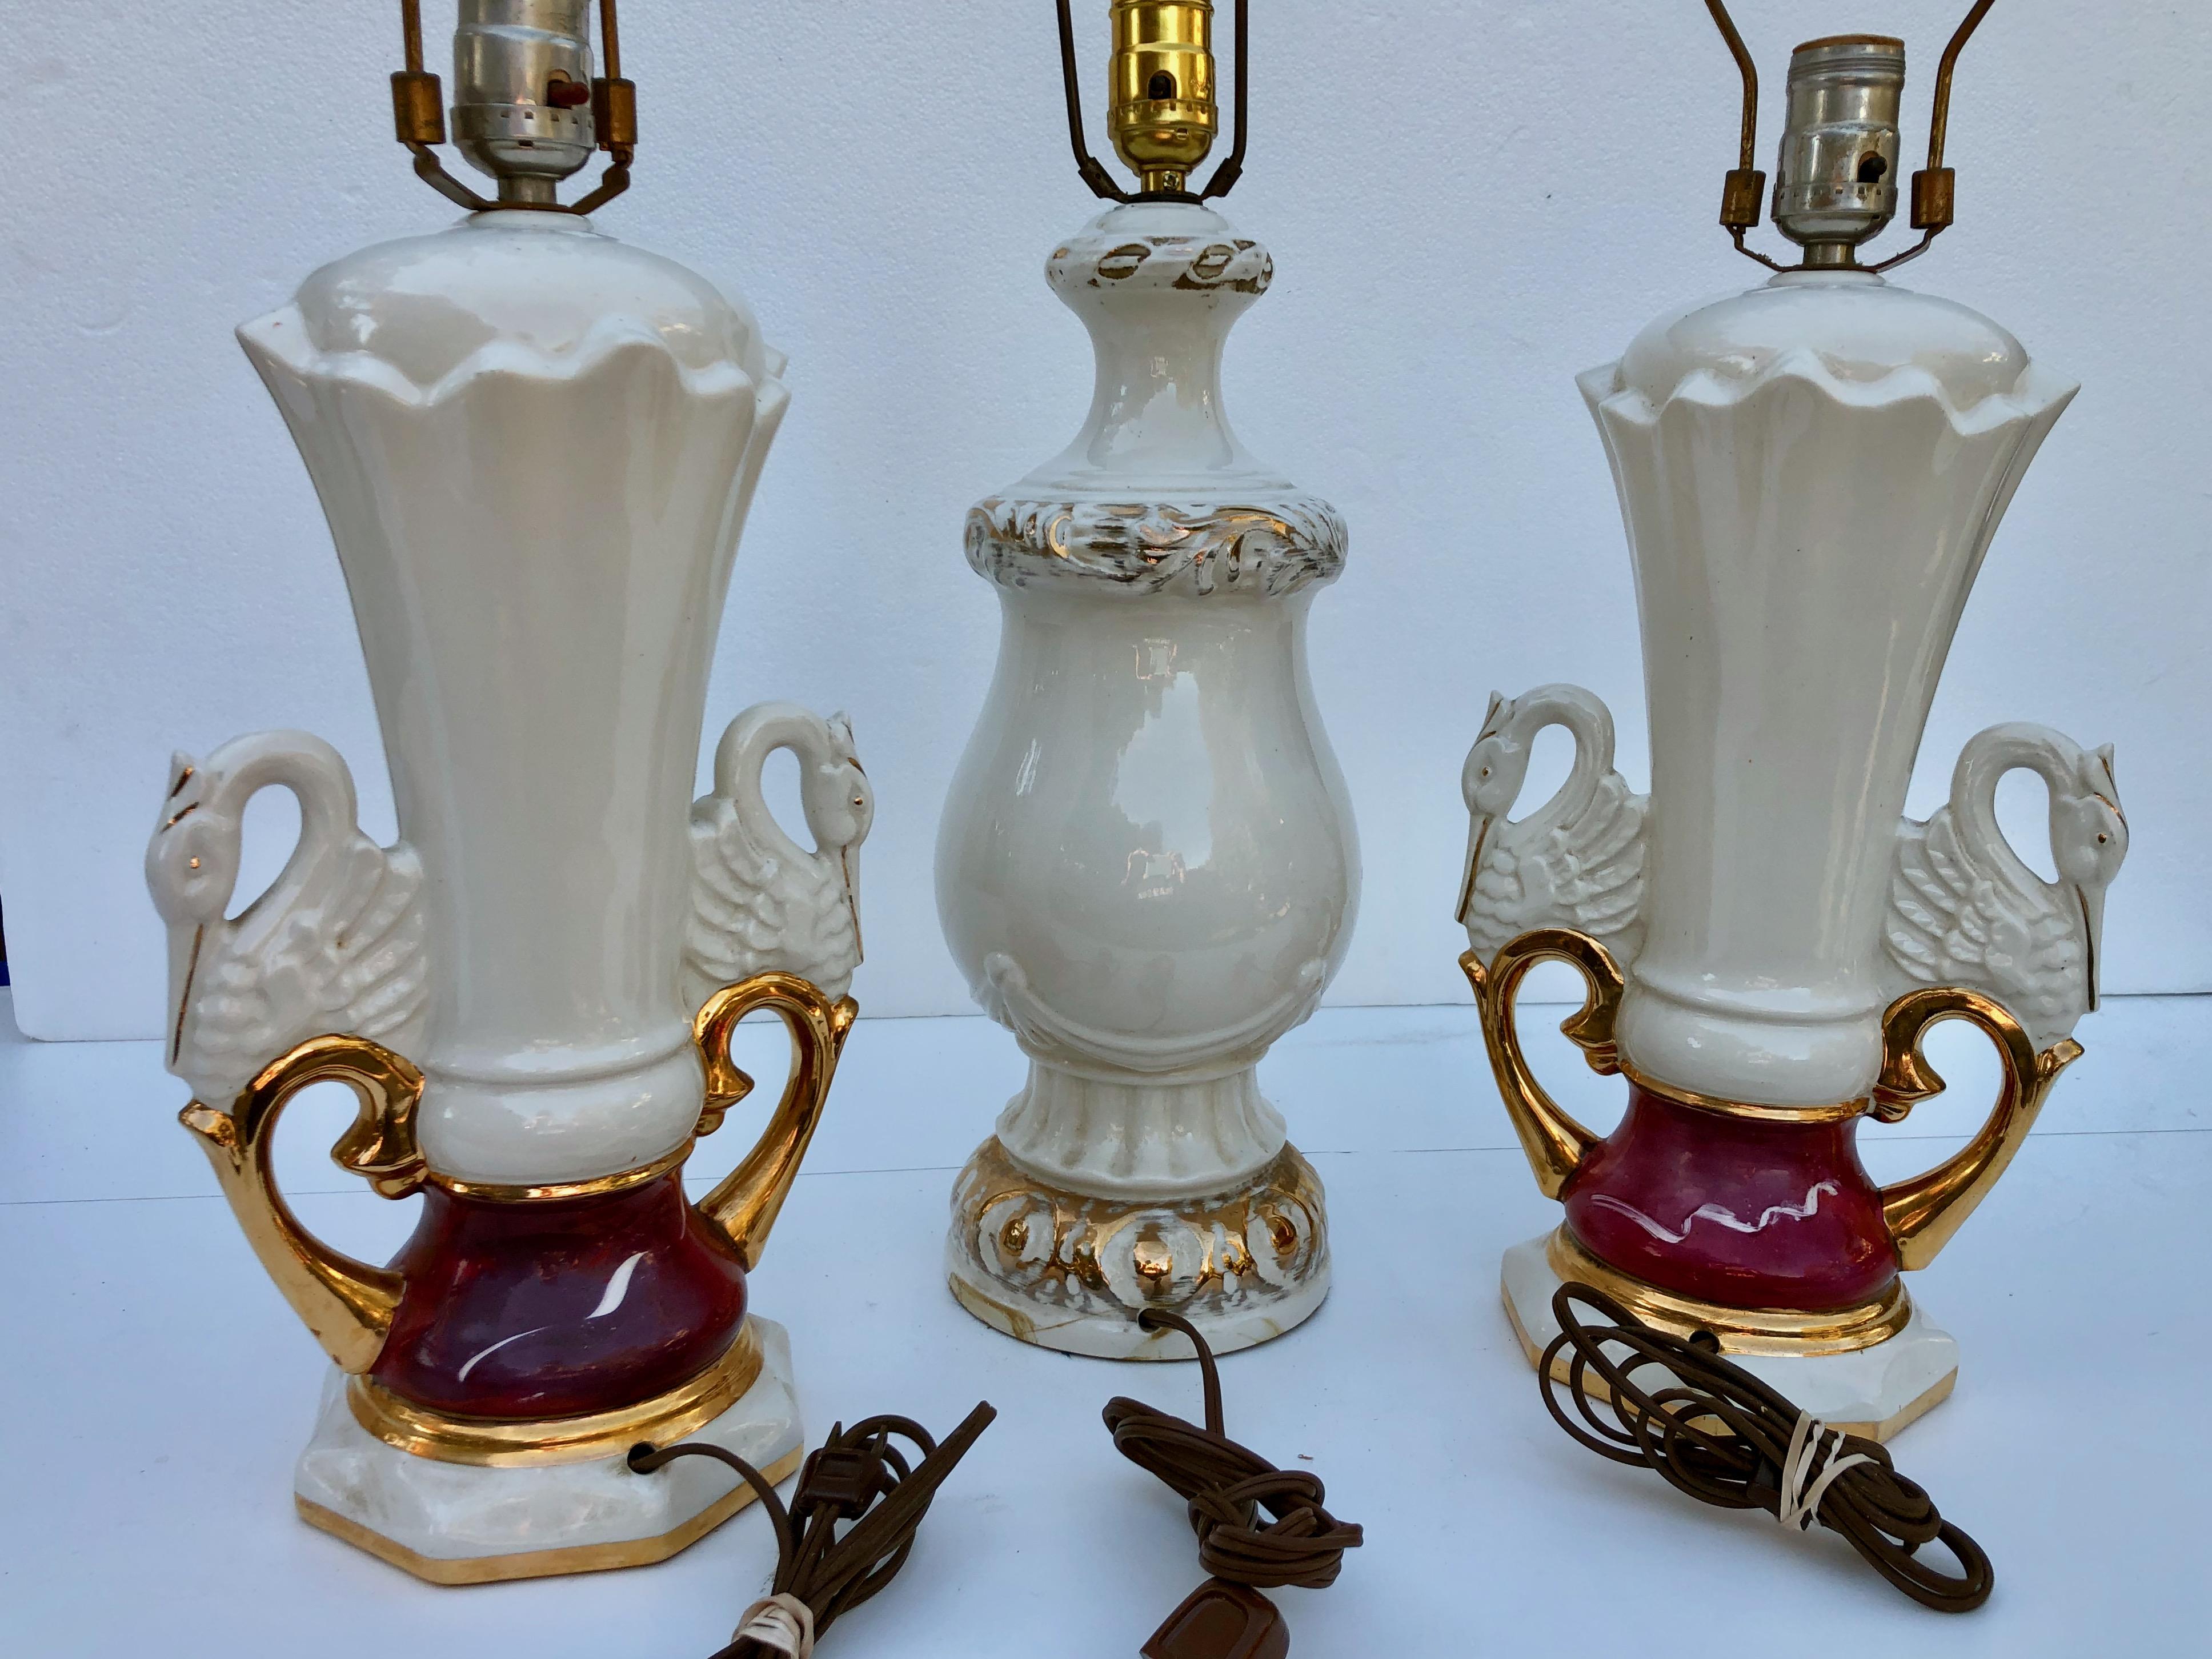 3 Jenny Worall Hand Painted Ceramic Table Lamps, 2 Are a Matched Set, Rose Motif For Sale 1